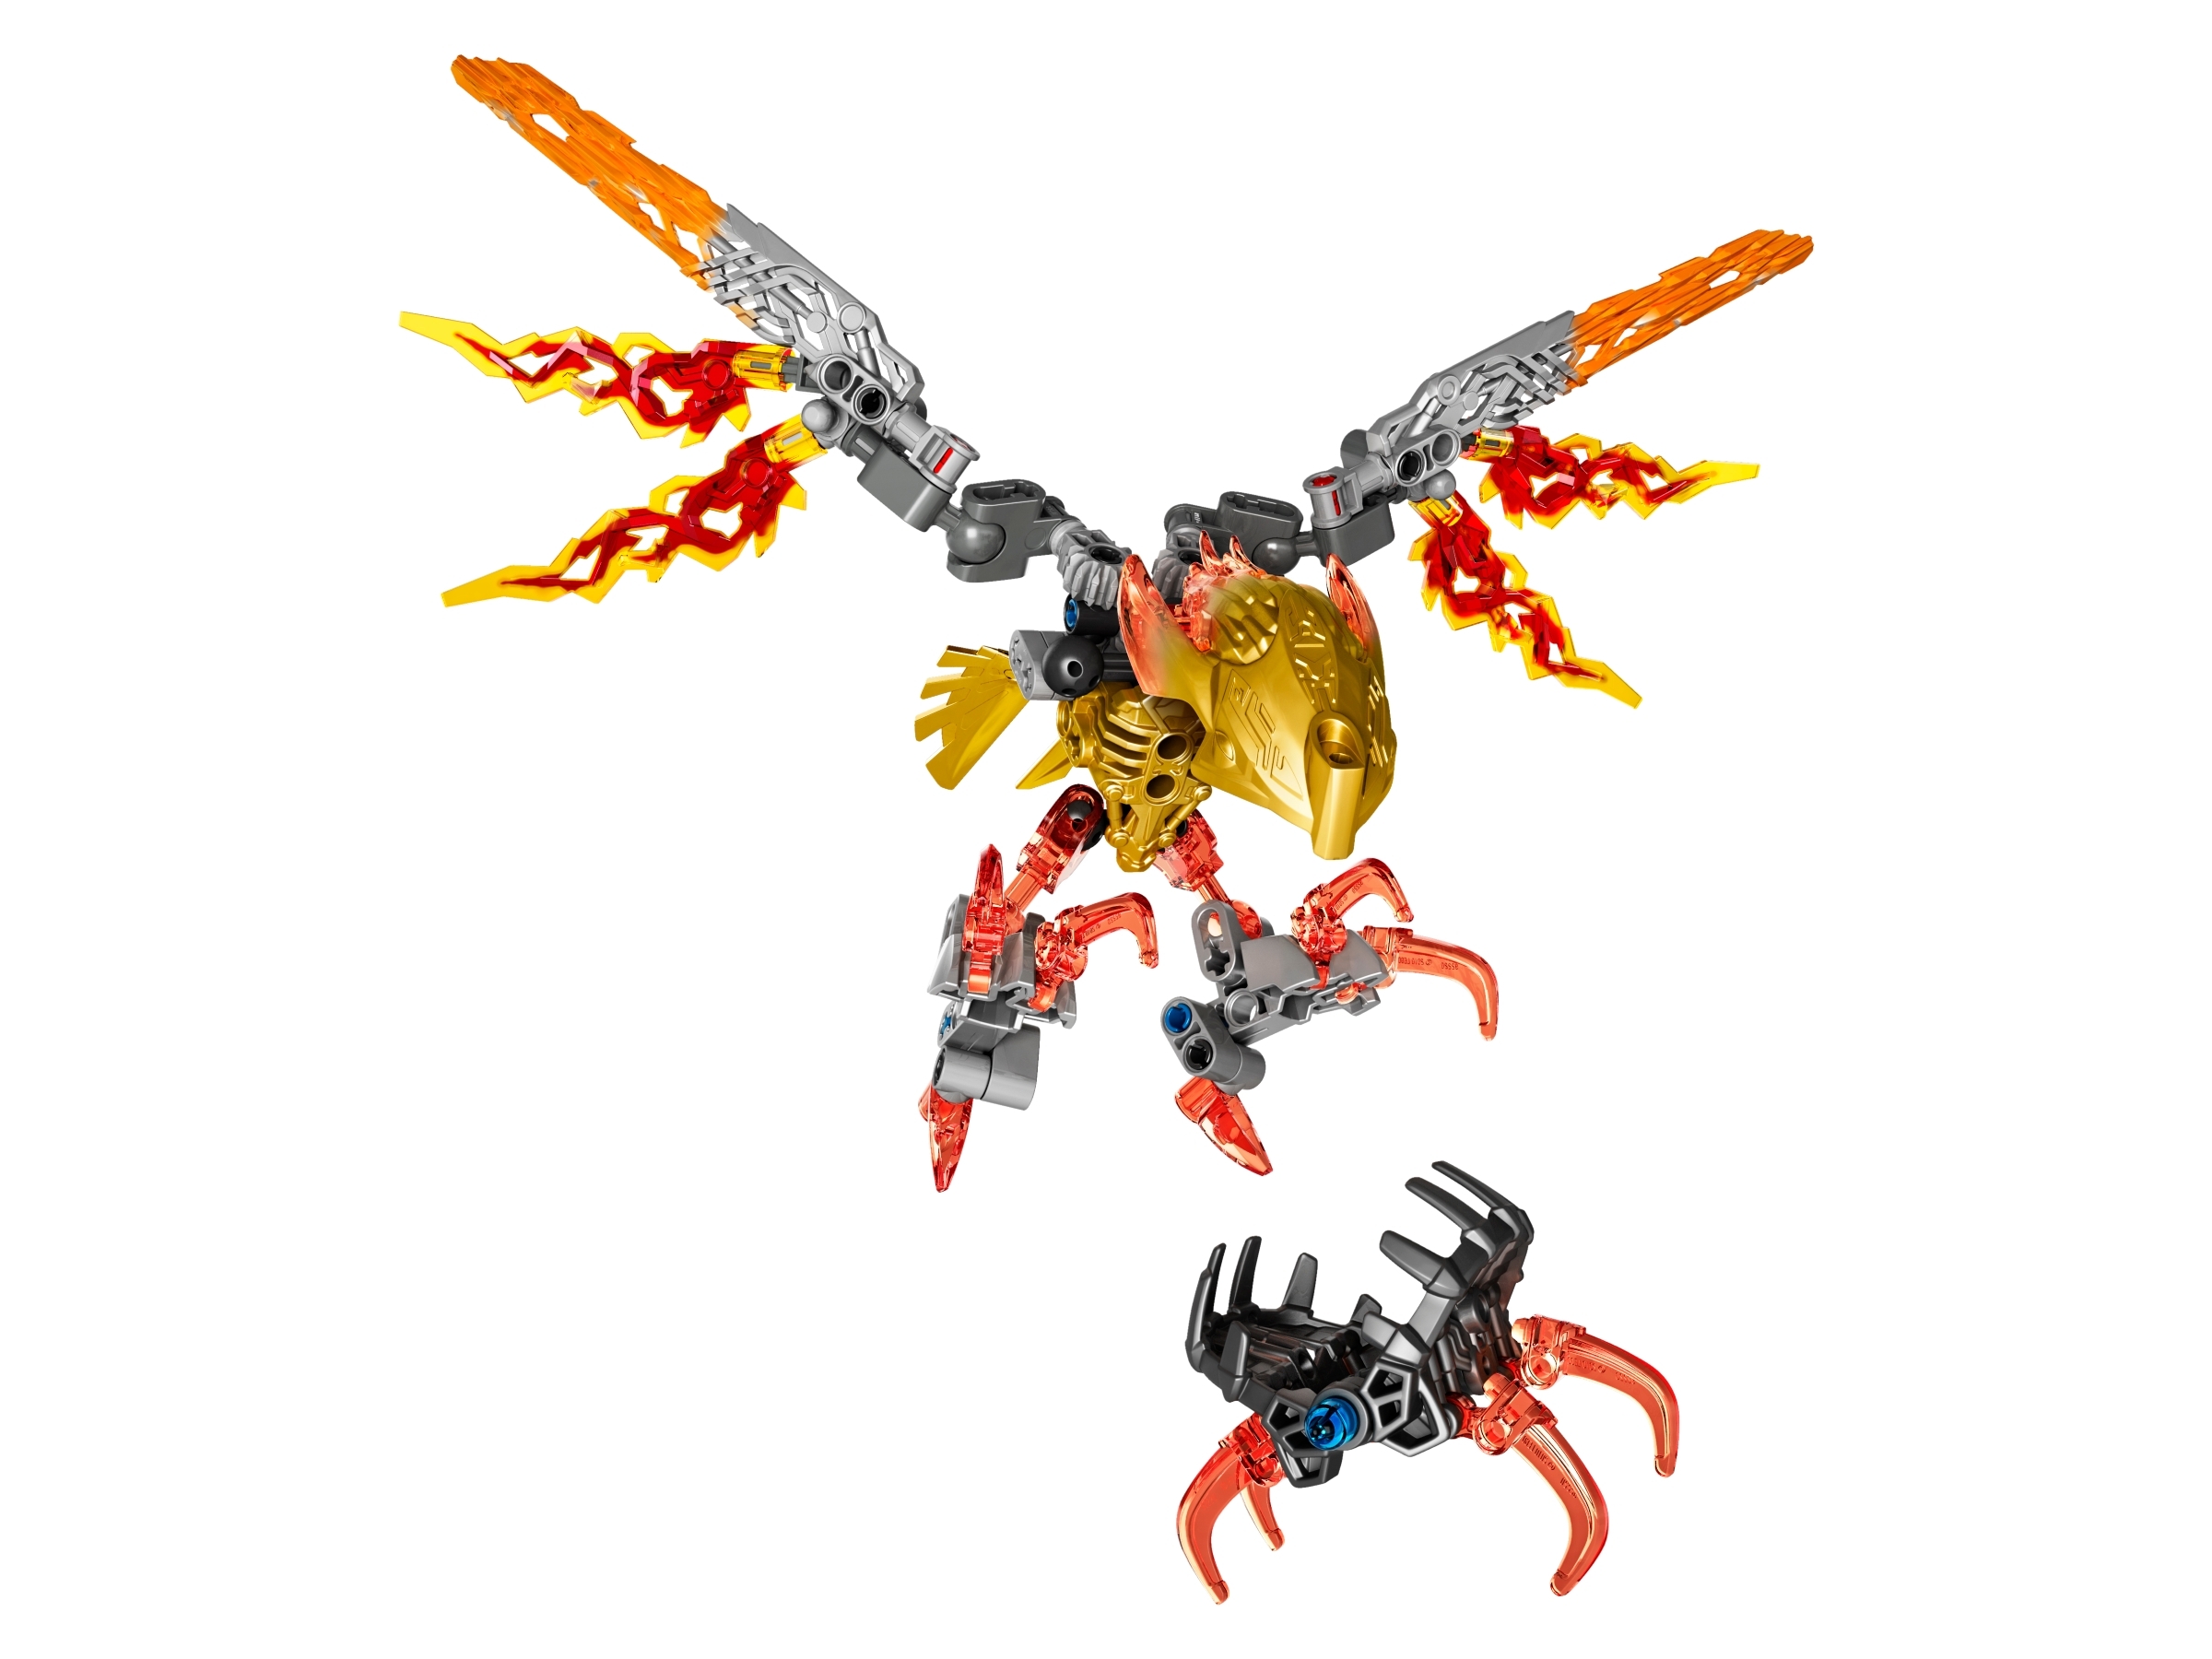 Creature of Fire | BIONICLE® | Buy online at LEGO® Shop US